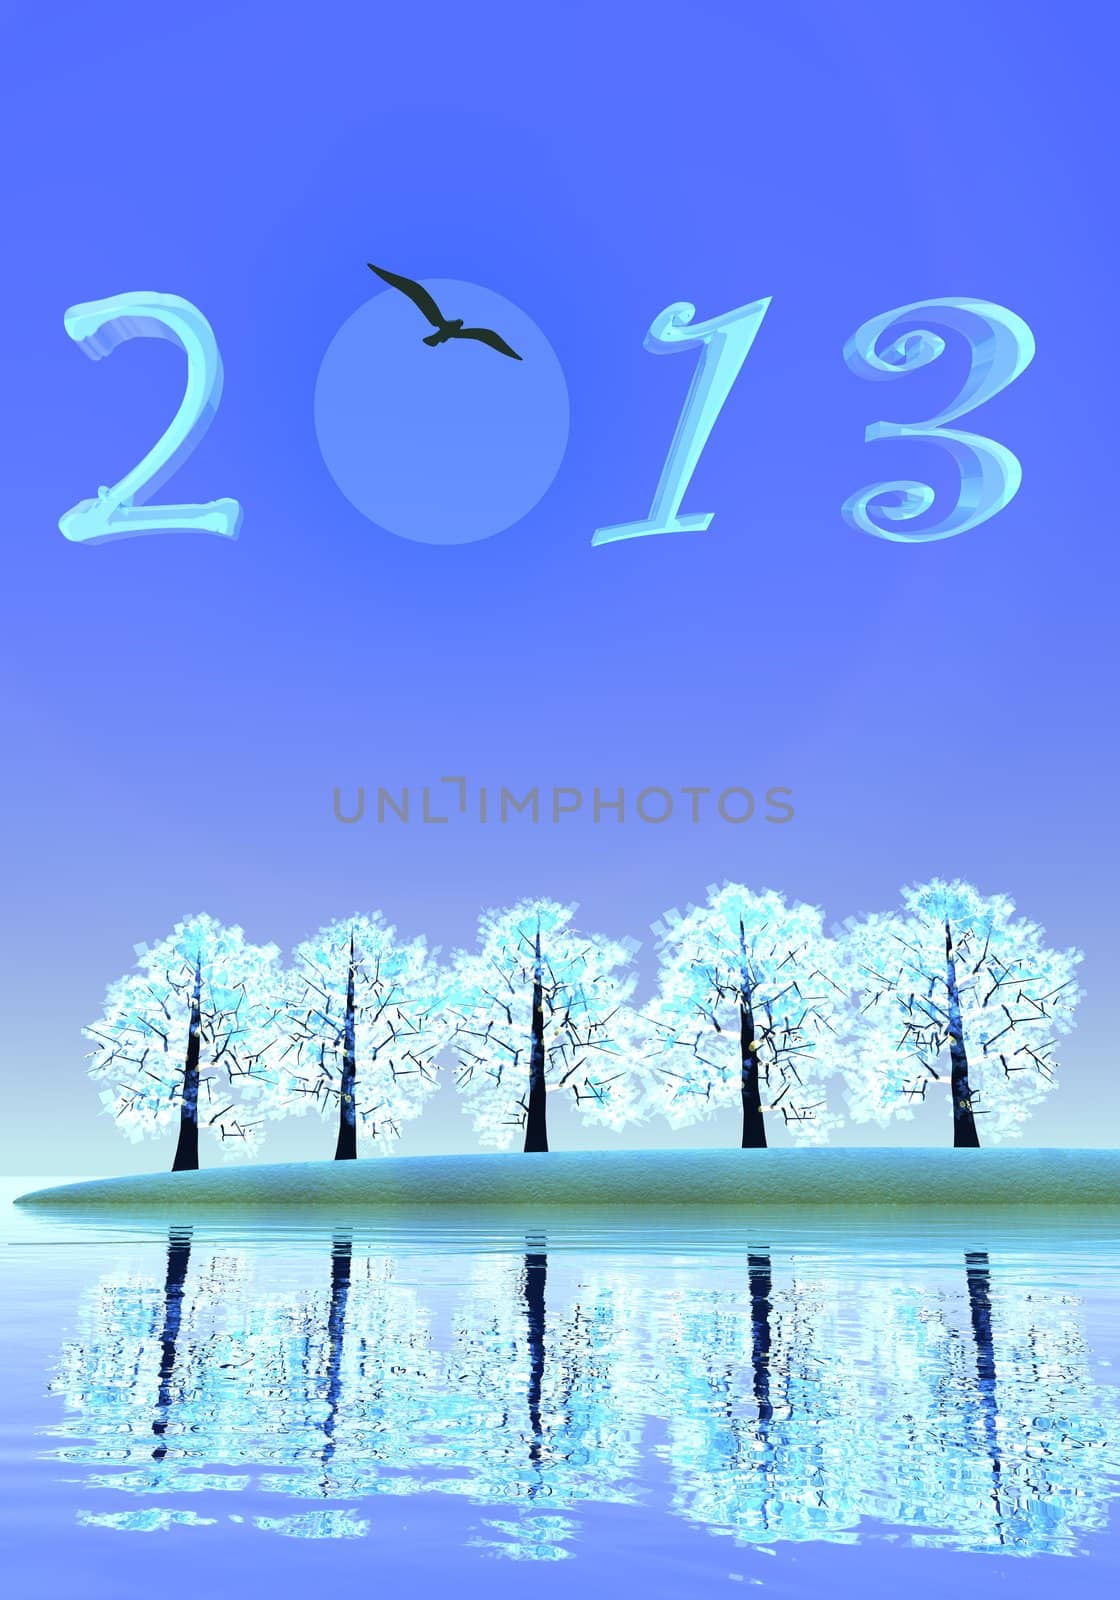 2013 numbers upon winter landscape of trees and water by night with full moon